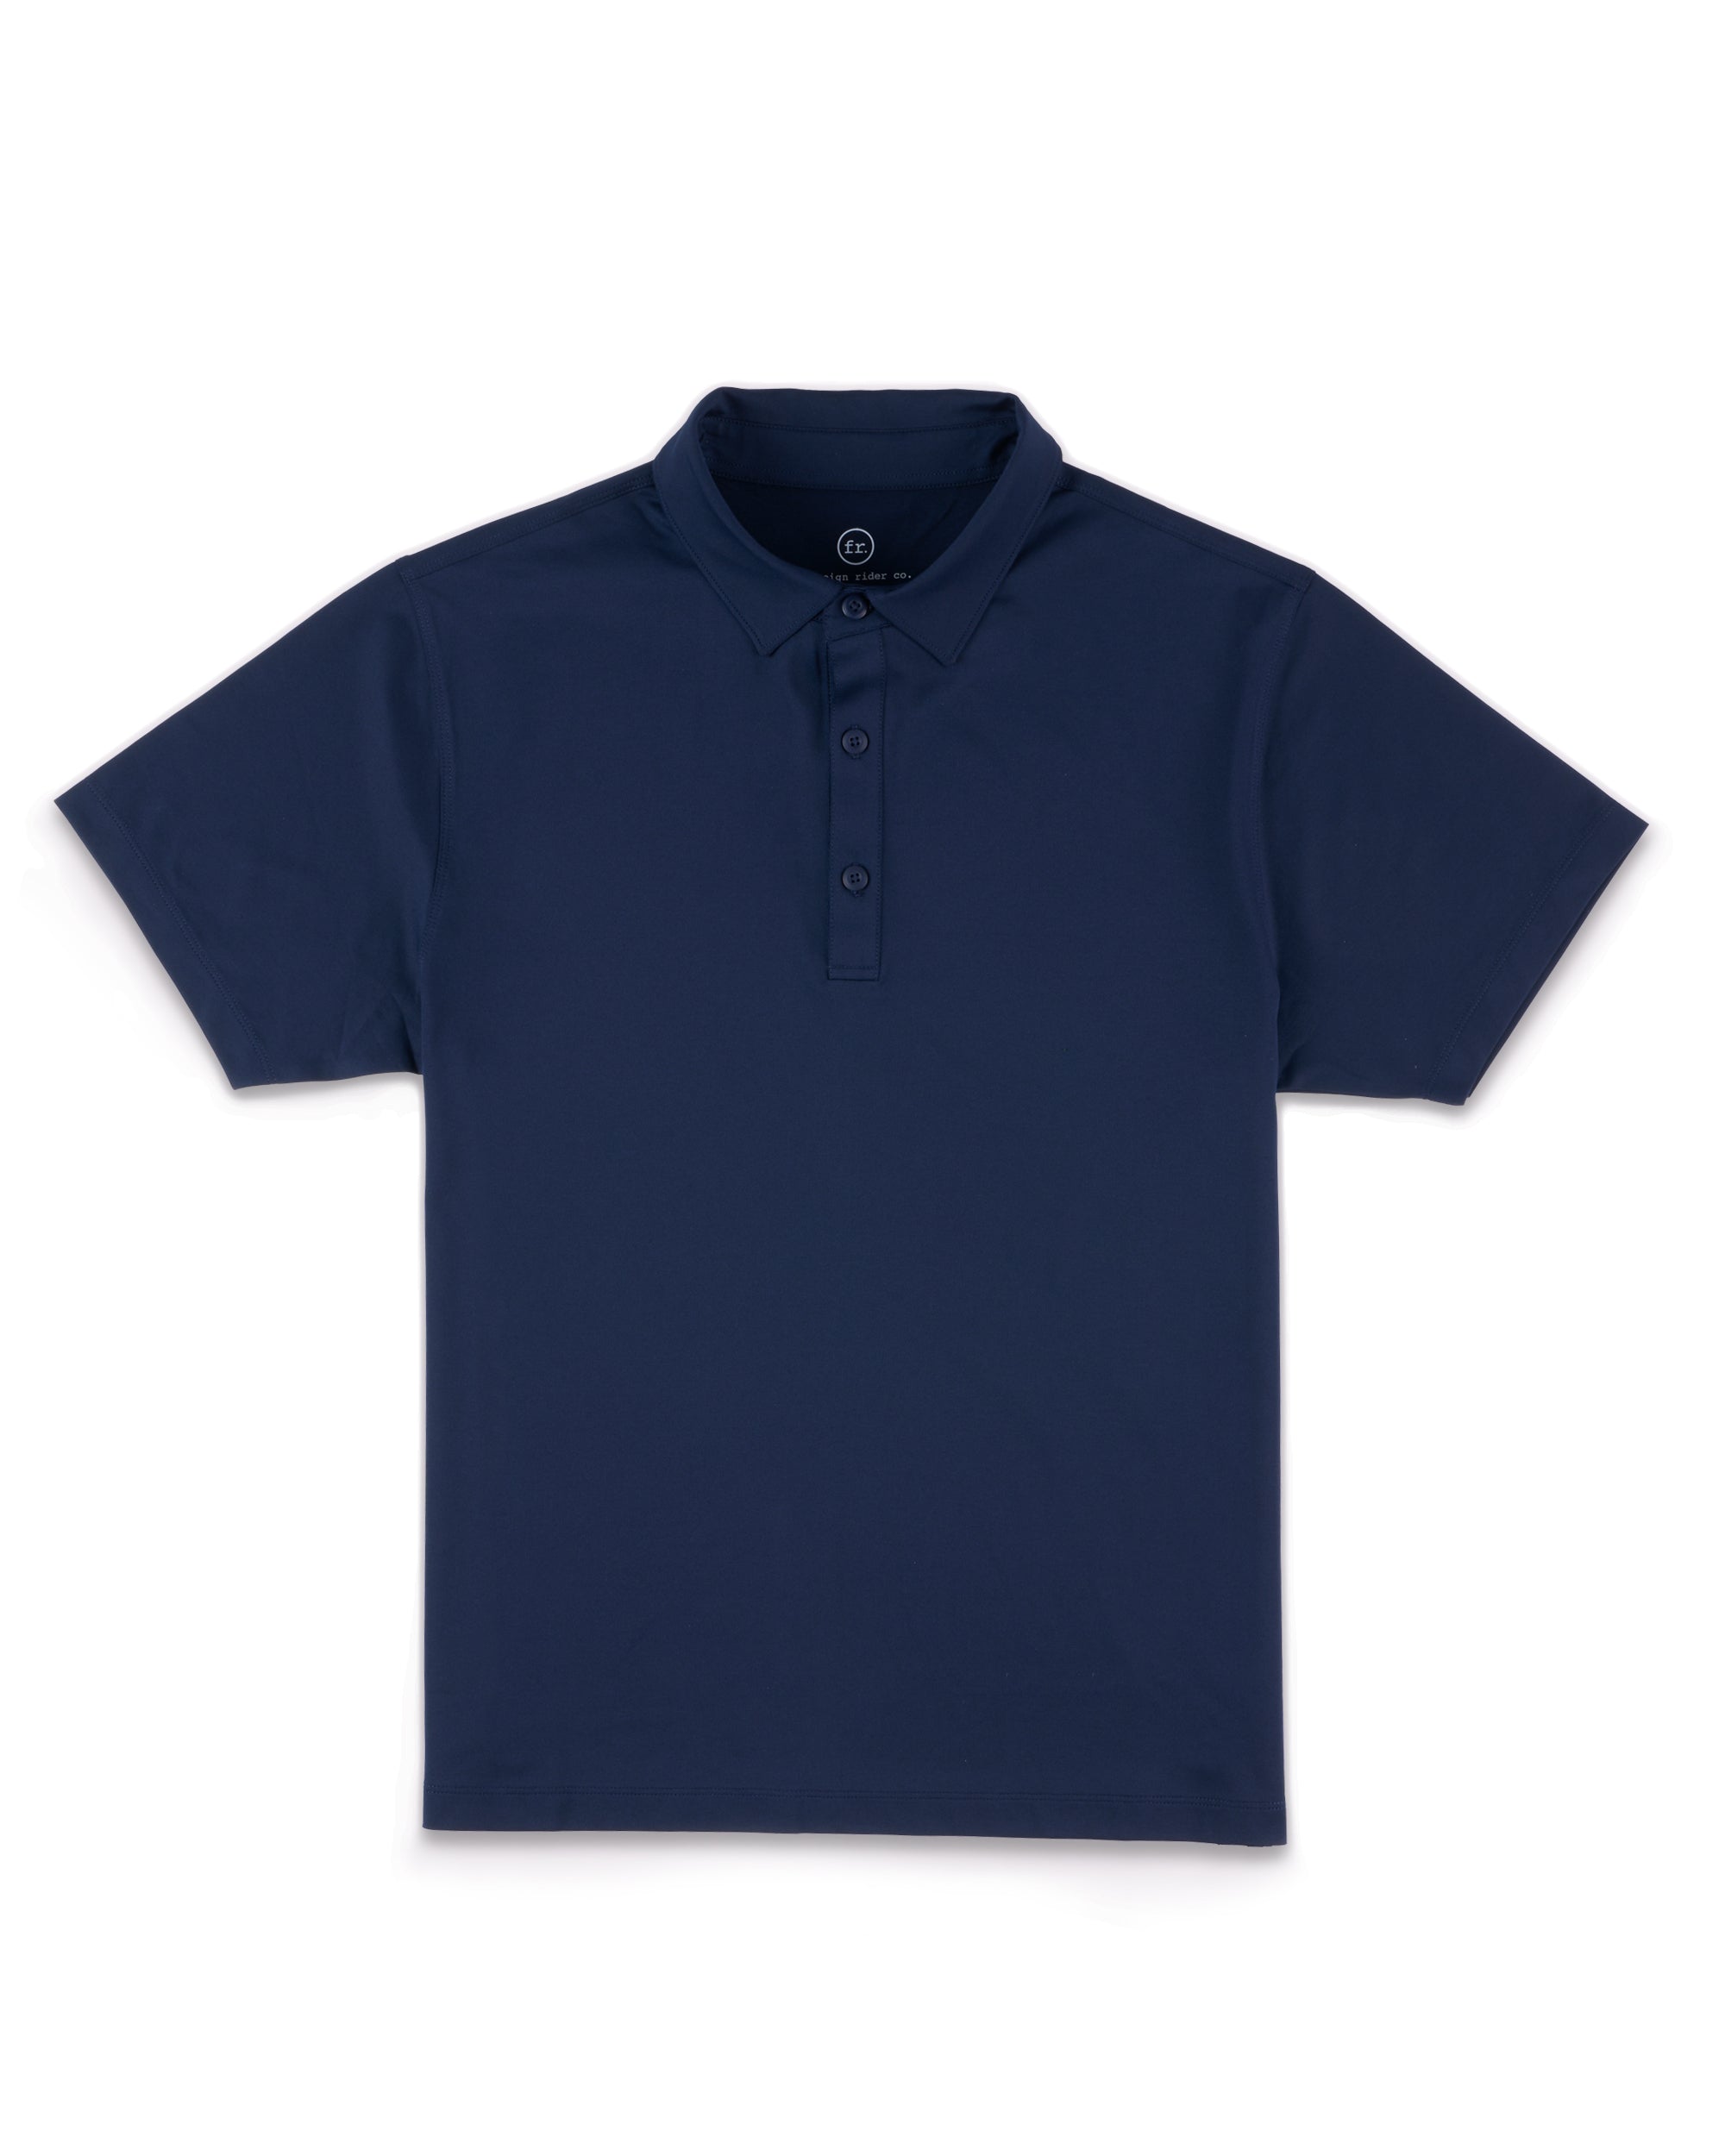 Performance Polo Navy - Foreign Rider Co.